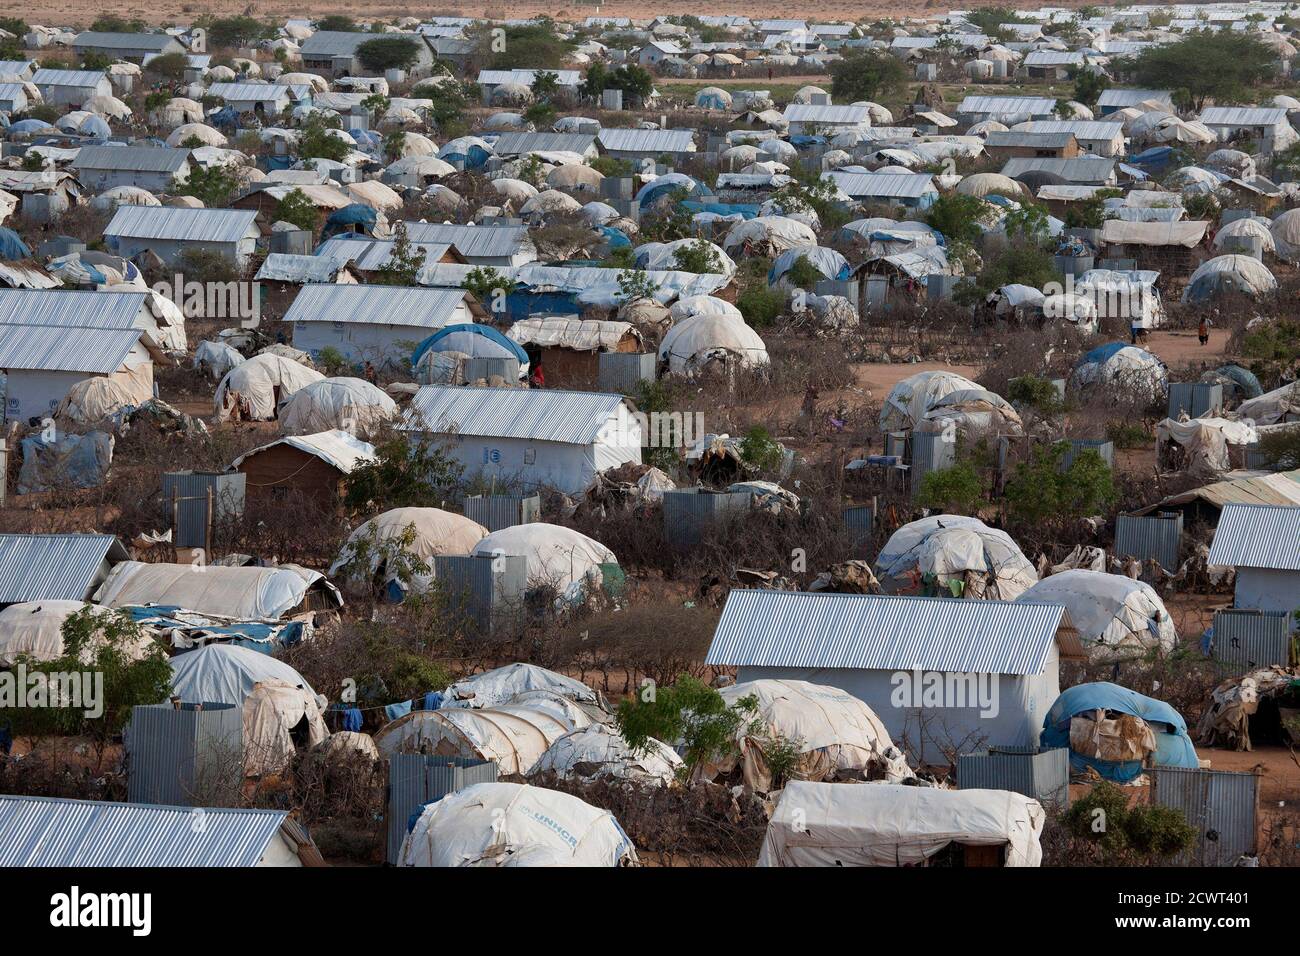 An aerial view shows an extension of the Ifo camp, one of the several refugee settlements in Dadaab, Garissa County, northeastern Kenya, October 7, 2013.   REUTERS/Siegfried Modola  (KENYA - Tags: POLITICS SOCIETY IMMIGRATION) Stock Photo